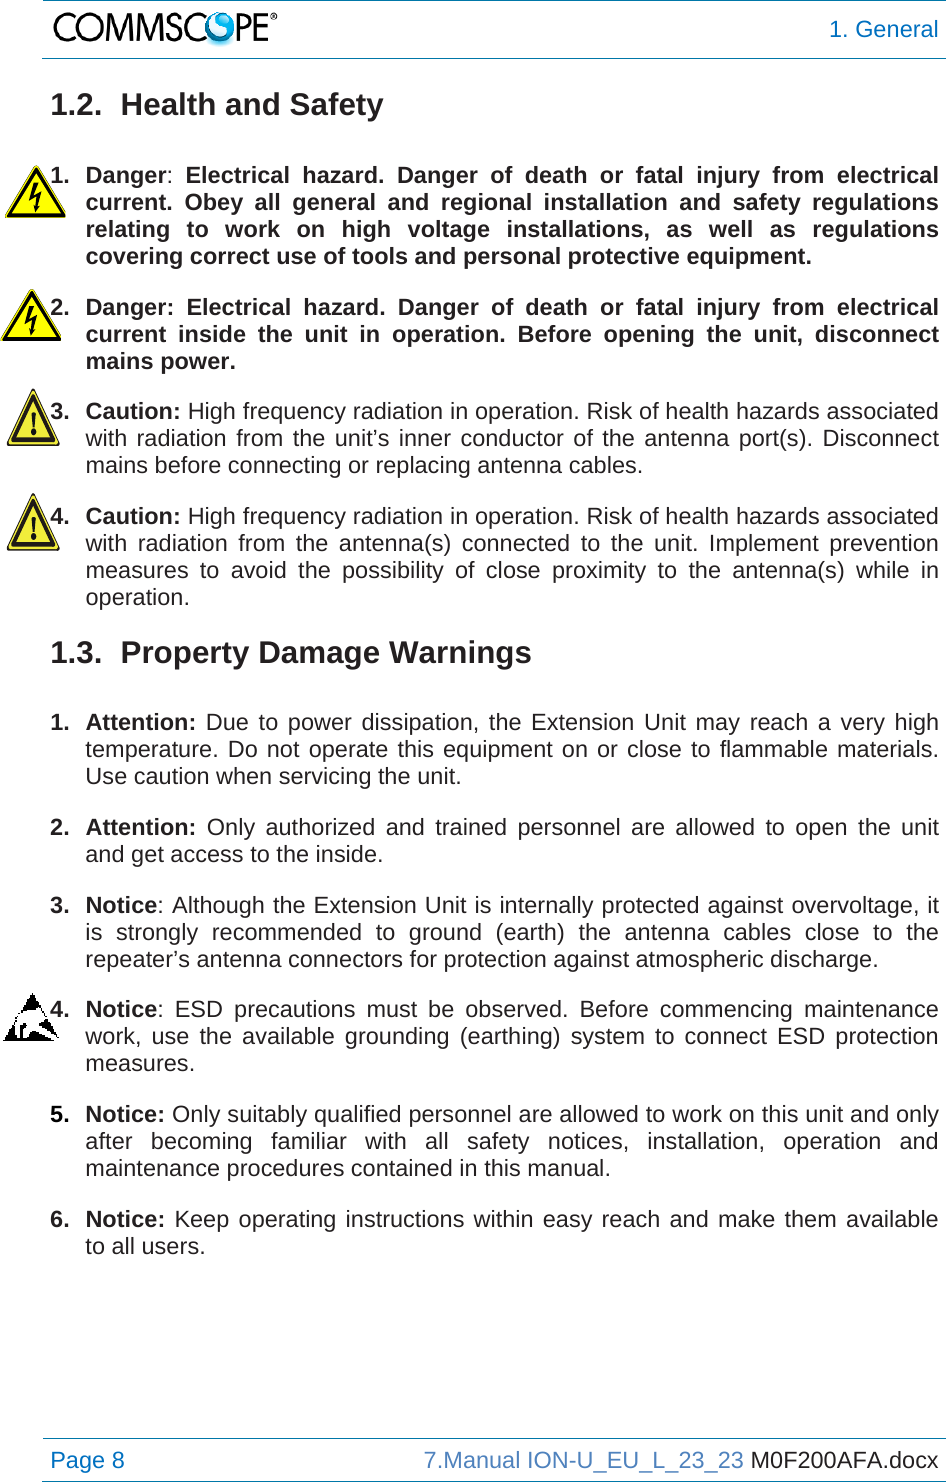  1. General Page 8  7.Manual ION-U_EU_L_23_23 M0F200AFA.docx  1.2.  Health and Safety  1. Danger:  Electrical hazard. Danger of death or fatal injury from electrical current. Obey all general and regional installation and safety regulations relating to work on high voltage installations, as well as regulations covering correct use of tools and personal protective equipment. 2. Danger: Electrical hazard. Danger of death or fatal injury from electrical current inside the unit in operation. Before opening the unit, disconnect mains power. 3. Caution: High frequency radiation in operation. Risk of health hazards associated with radiation from the unit’s inner conductor of the antenna port(s). Disconnect mains before connecting or replacing antenna cables. 4. Caution: High frequency radiation in operation. Risk of health hazards associated with radiation from the antenna(s) connected to the unit. Implement prevention measures to avoid the possibility of close proximity to the antenna(s) while in operation. 1.3. Property Damage Warnings  1. Attention: Due to power dissipation, the Extension Unit may reach a very high temperature. Do not operate this equipment on or close to flammable materials. Use caution when servicing the unit. 2. Attention: Only authorized and trained personnel are allowed to open the unit and get access to the inside. 3. Notice: Although the Extension Unit is internally protected against overvoltage, it is strongly recommended to ground (earth) the antenna cables close to the repeater’s antenna connectors for protection against atmospheric discharge. 4. Notice: ESD precautions must be observed. Before commencing maintenance work, use the available grounding (earthing) system to connect ESD protection measures. 5.  Notice: Only suitably qualified personnel are allowed to work on this unit and only after becoming familiar with all safety notices, installation, operation and maintenance procedures contained in this manual. 6. Notice: Keep operating instructions within easy reach and make them available to all users.   